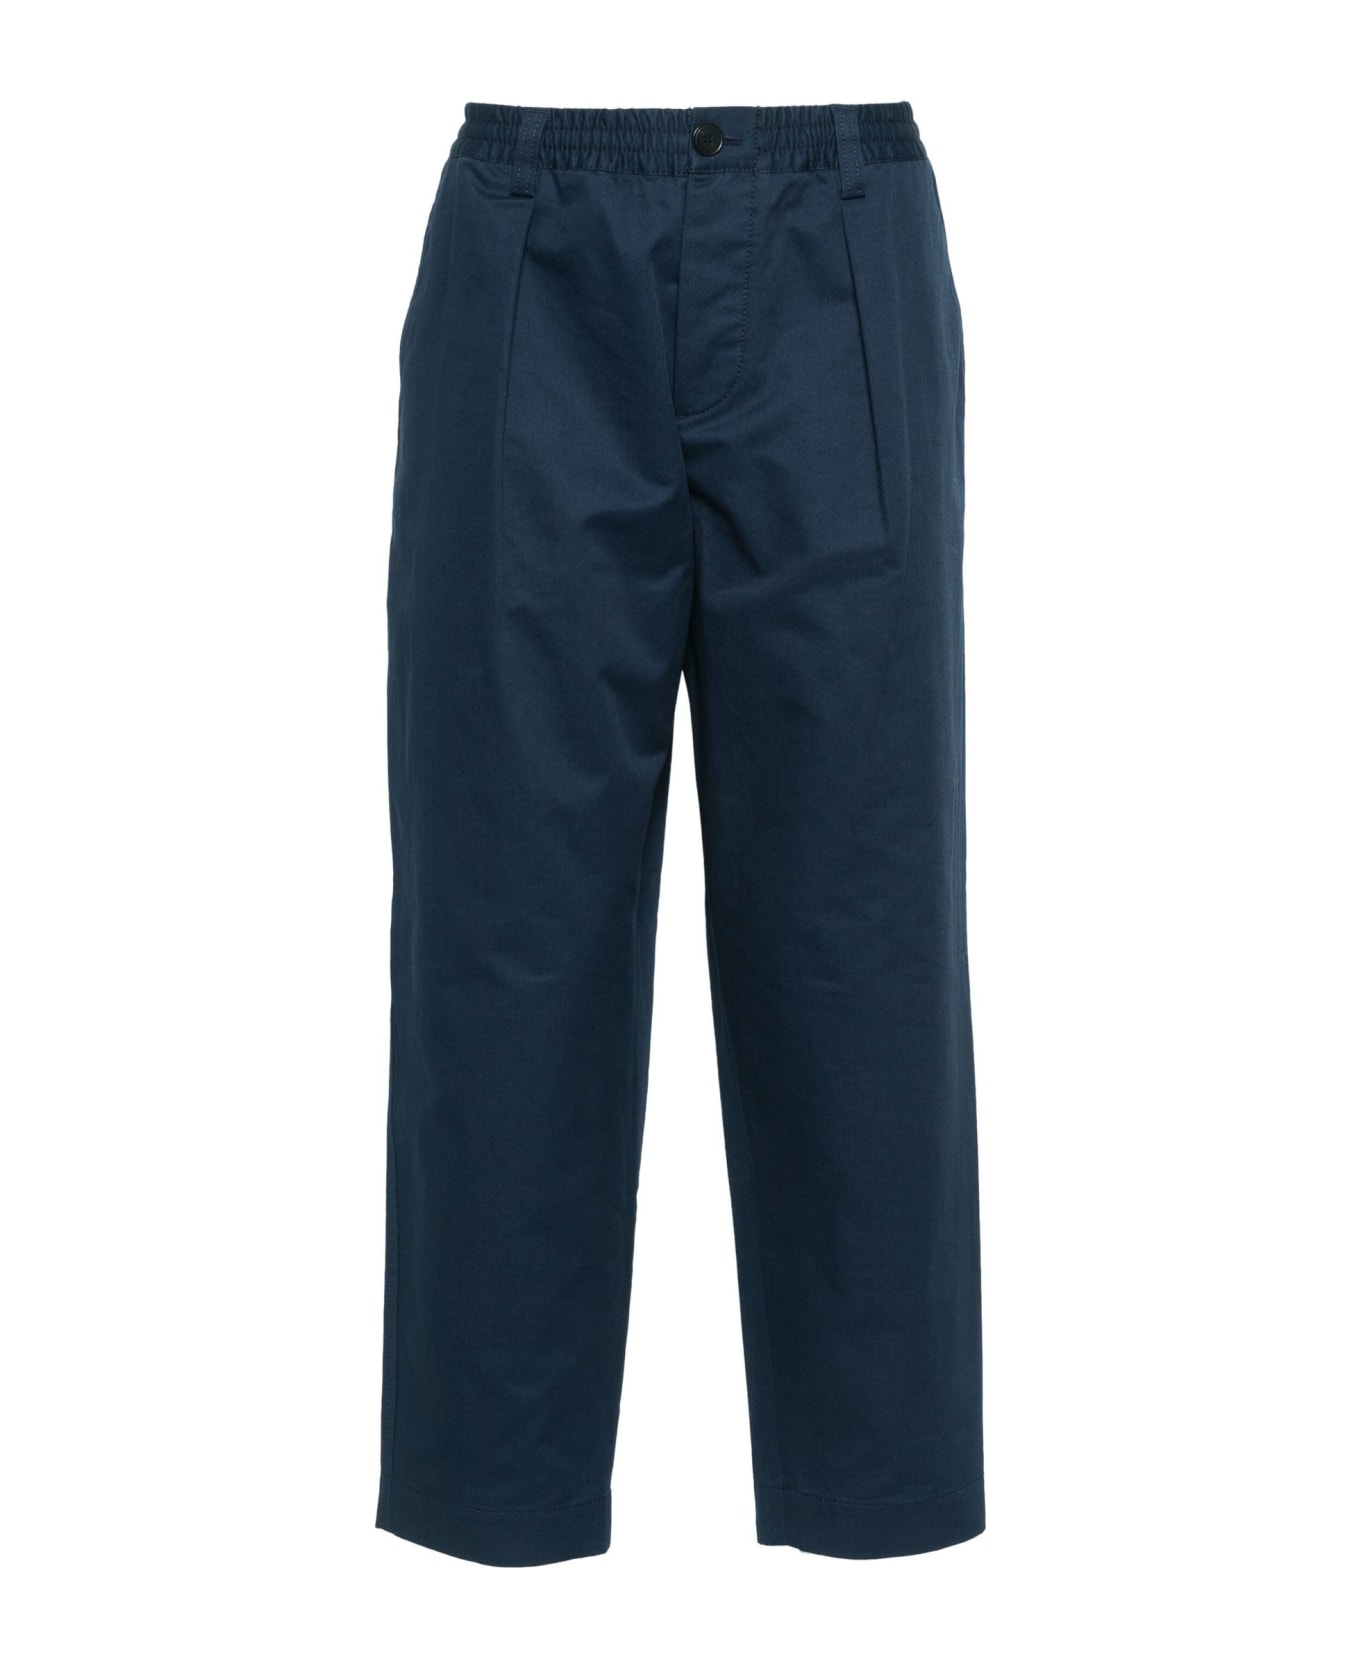 Marni Trousers Blue - NAVY ボトムス